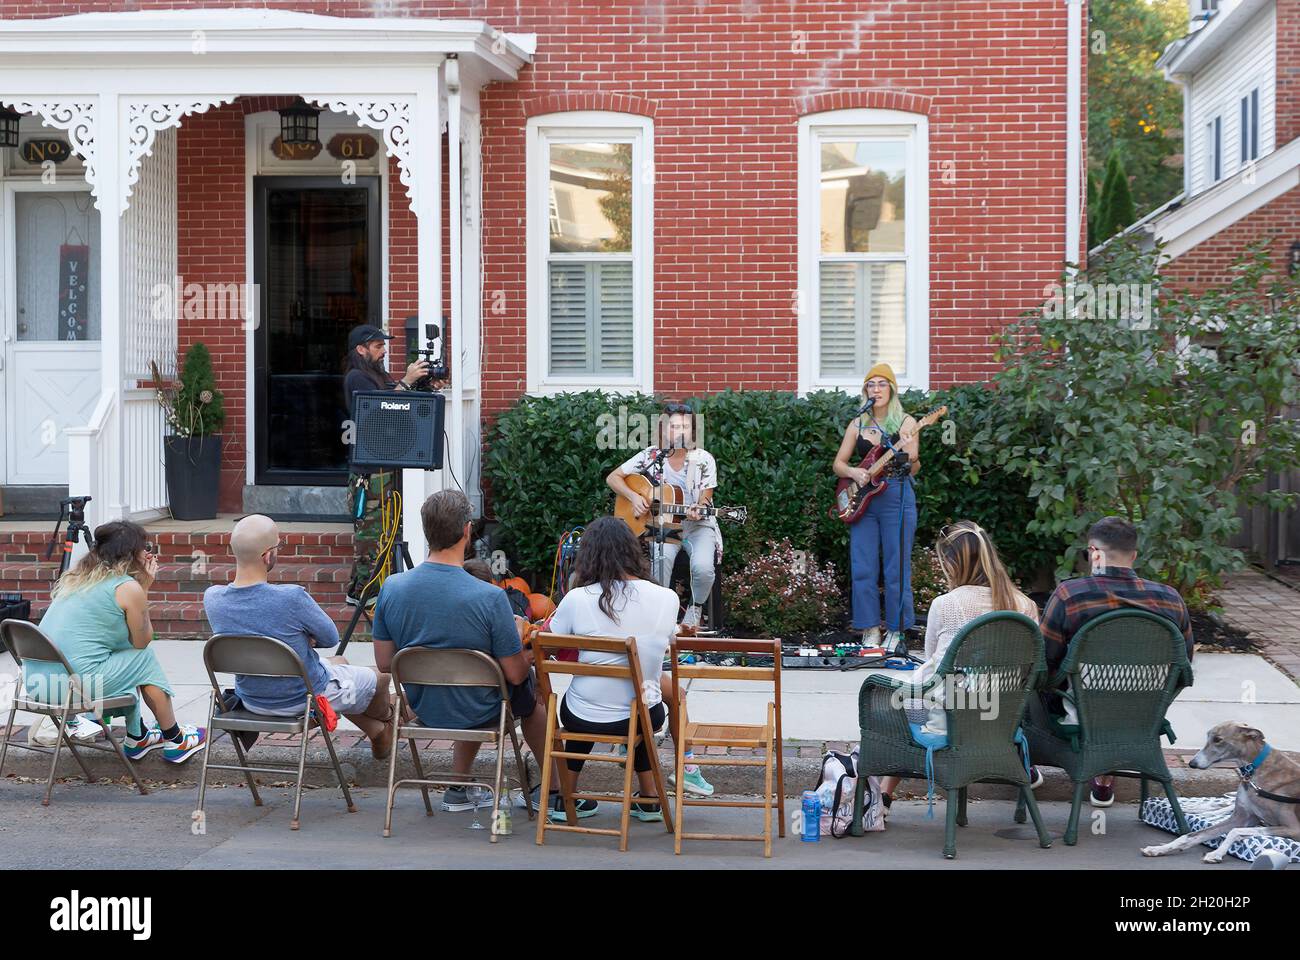 Porchfest, annual music event in Lambertville, New Jersey, brings local musicians & neighborhoods together sharing live music & a sense of community. Stock Photo